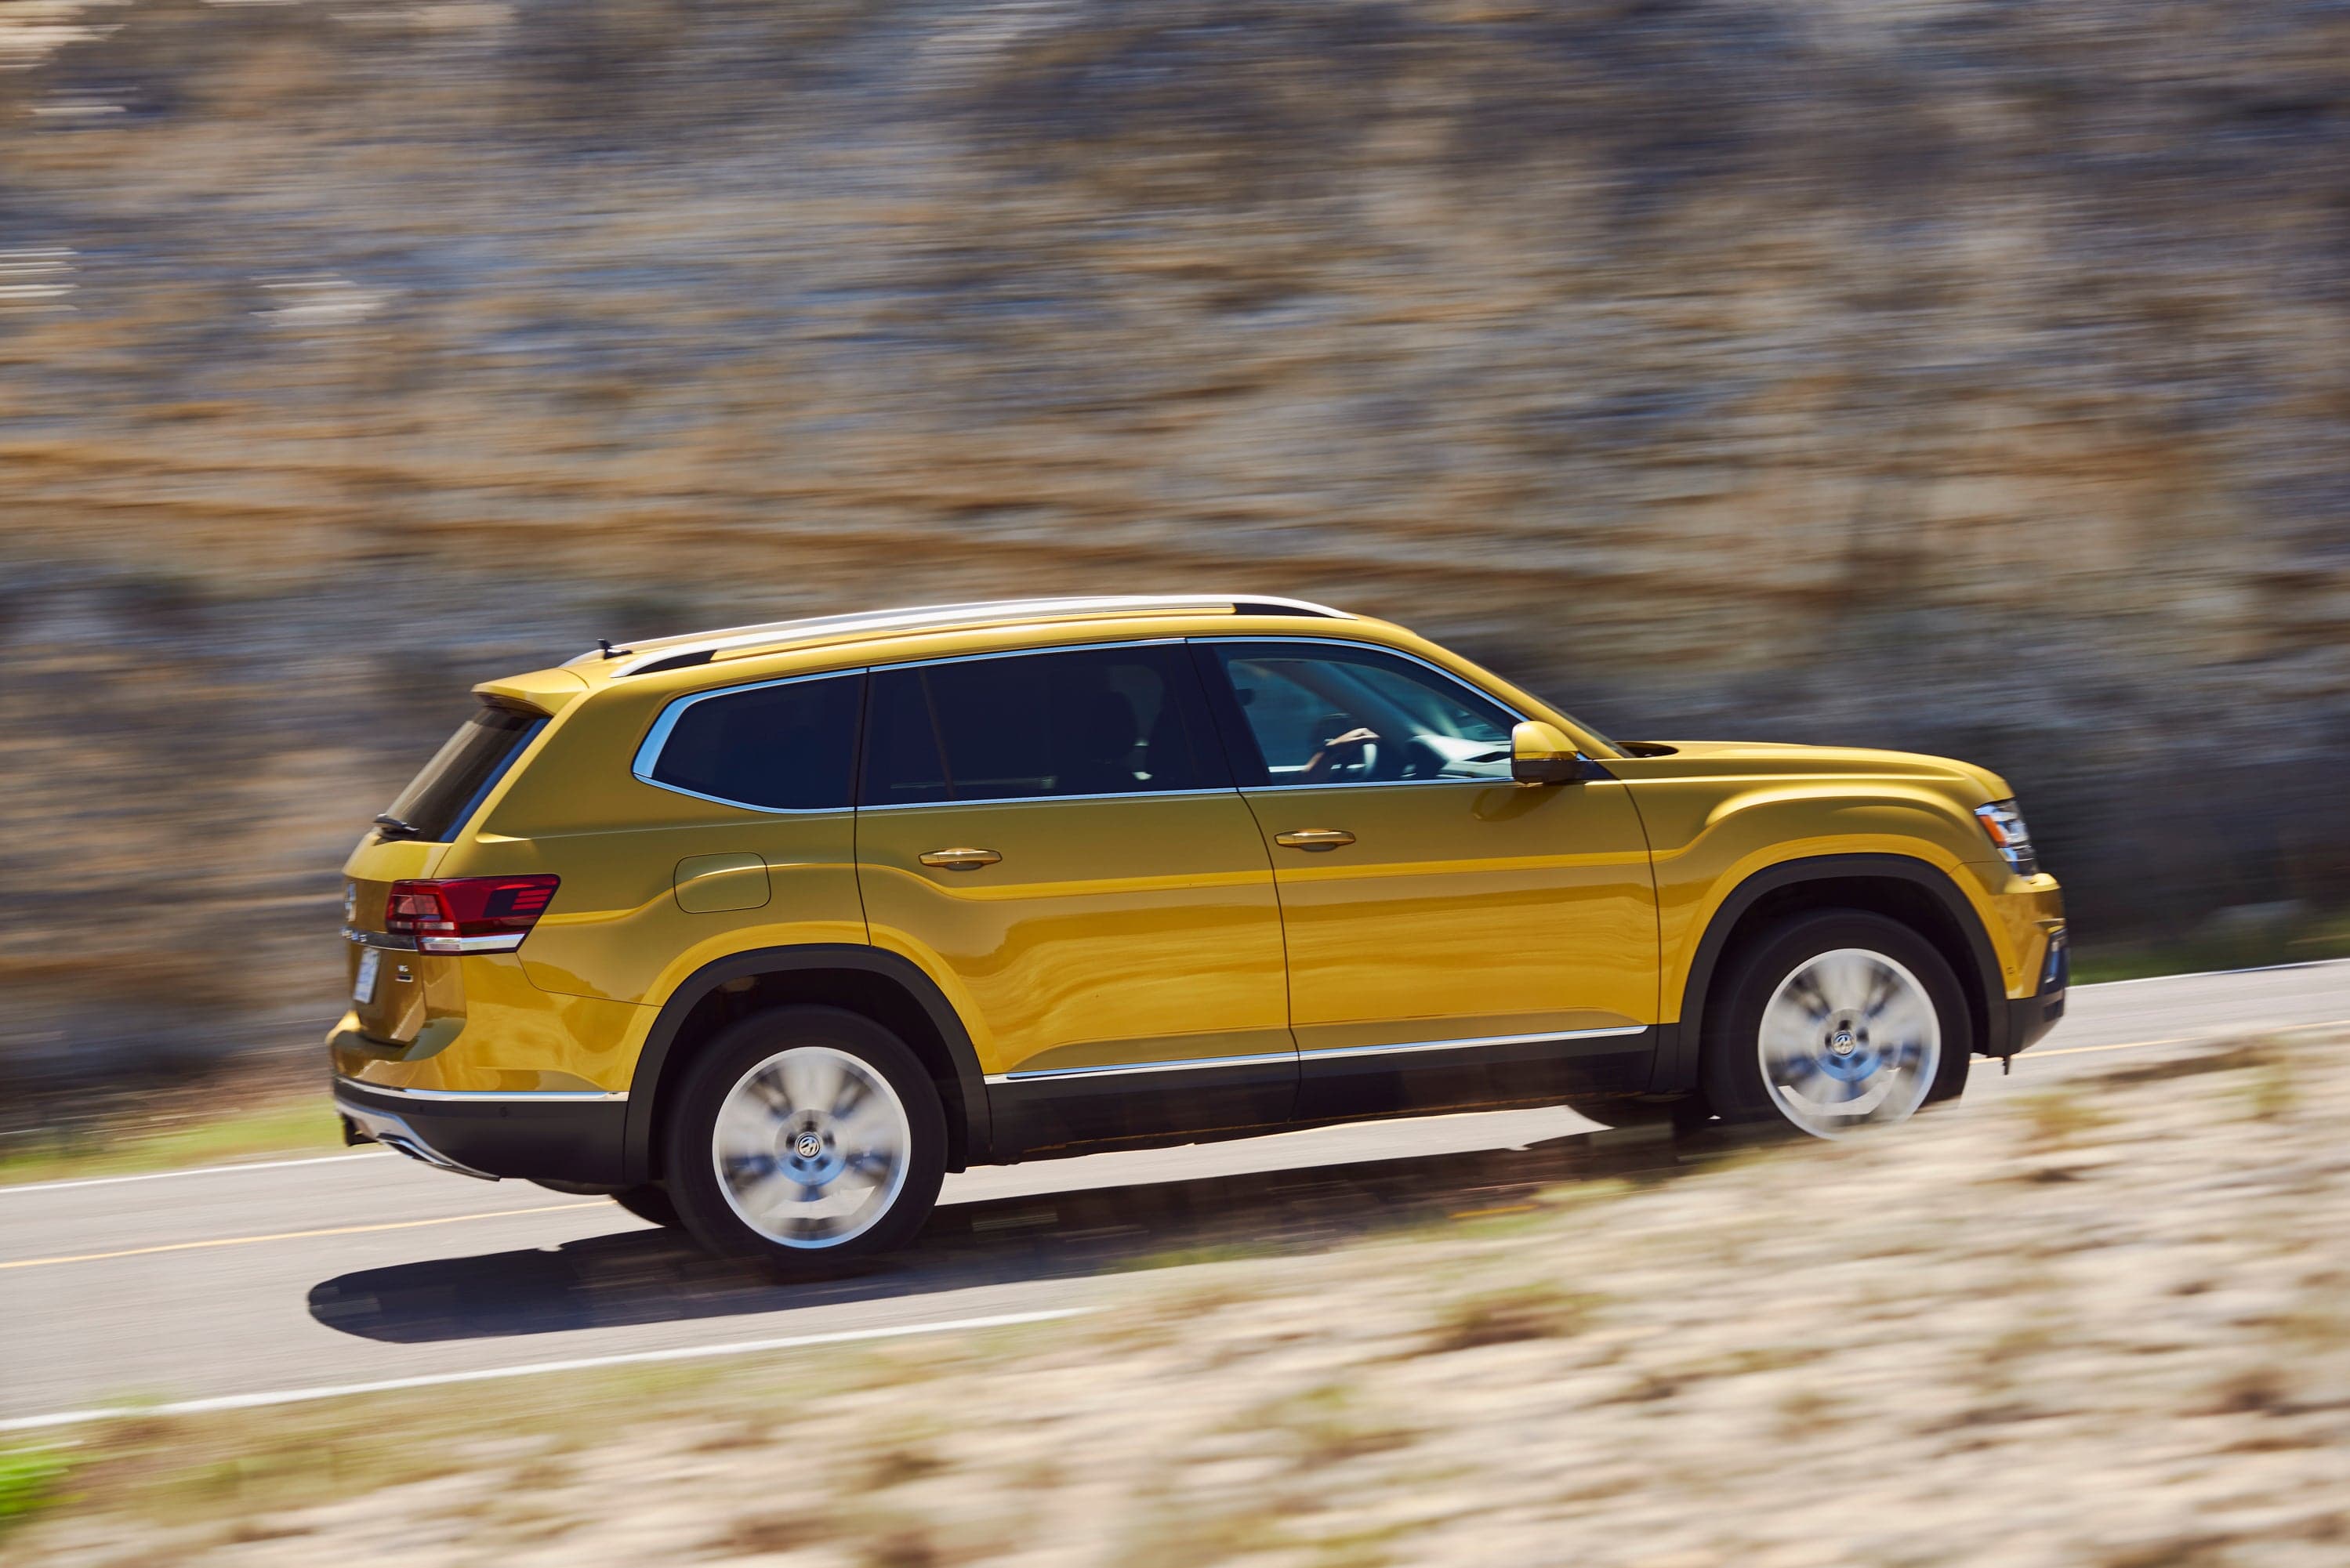 2018 Volkswagen Atlas Takes on the World: 7 First Impressions